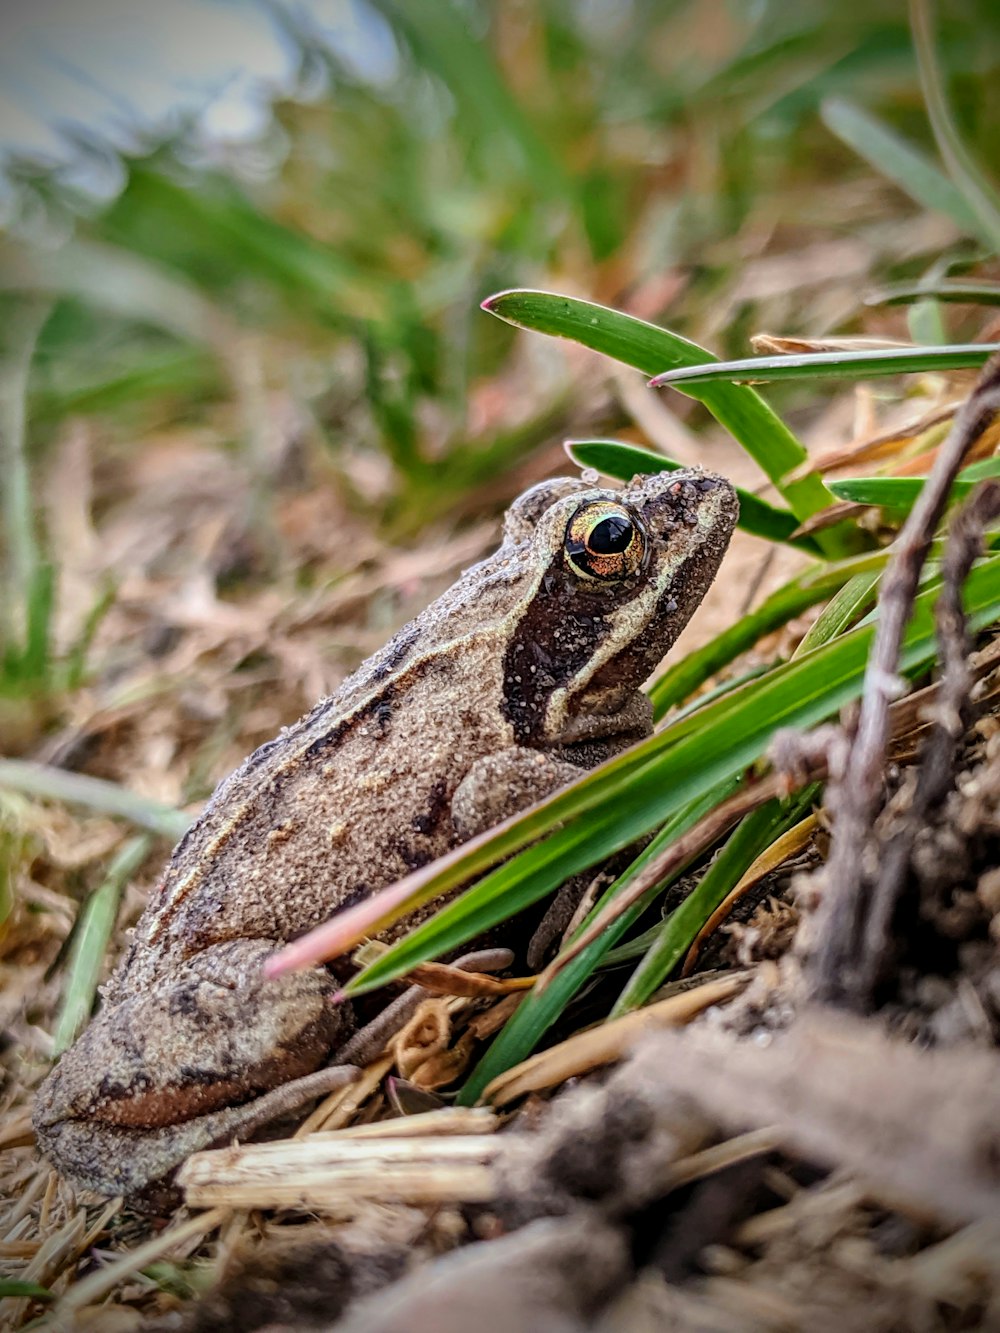 brown and black frog on green grass during daytime